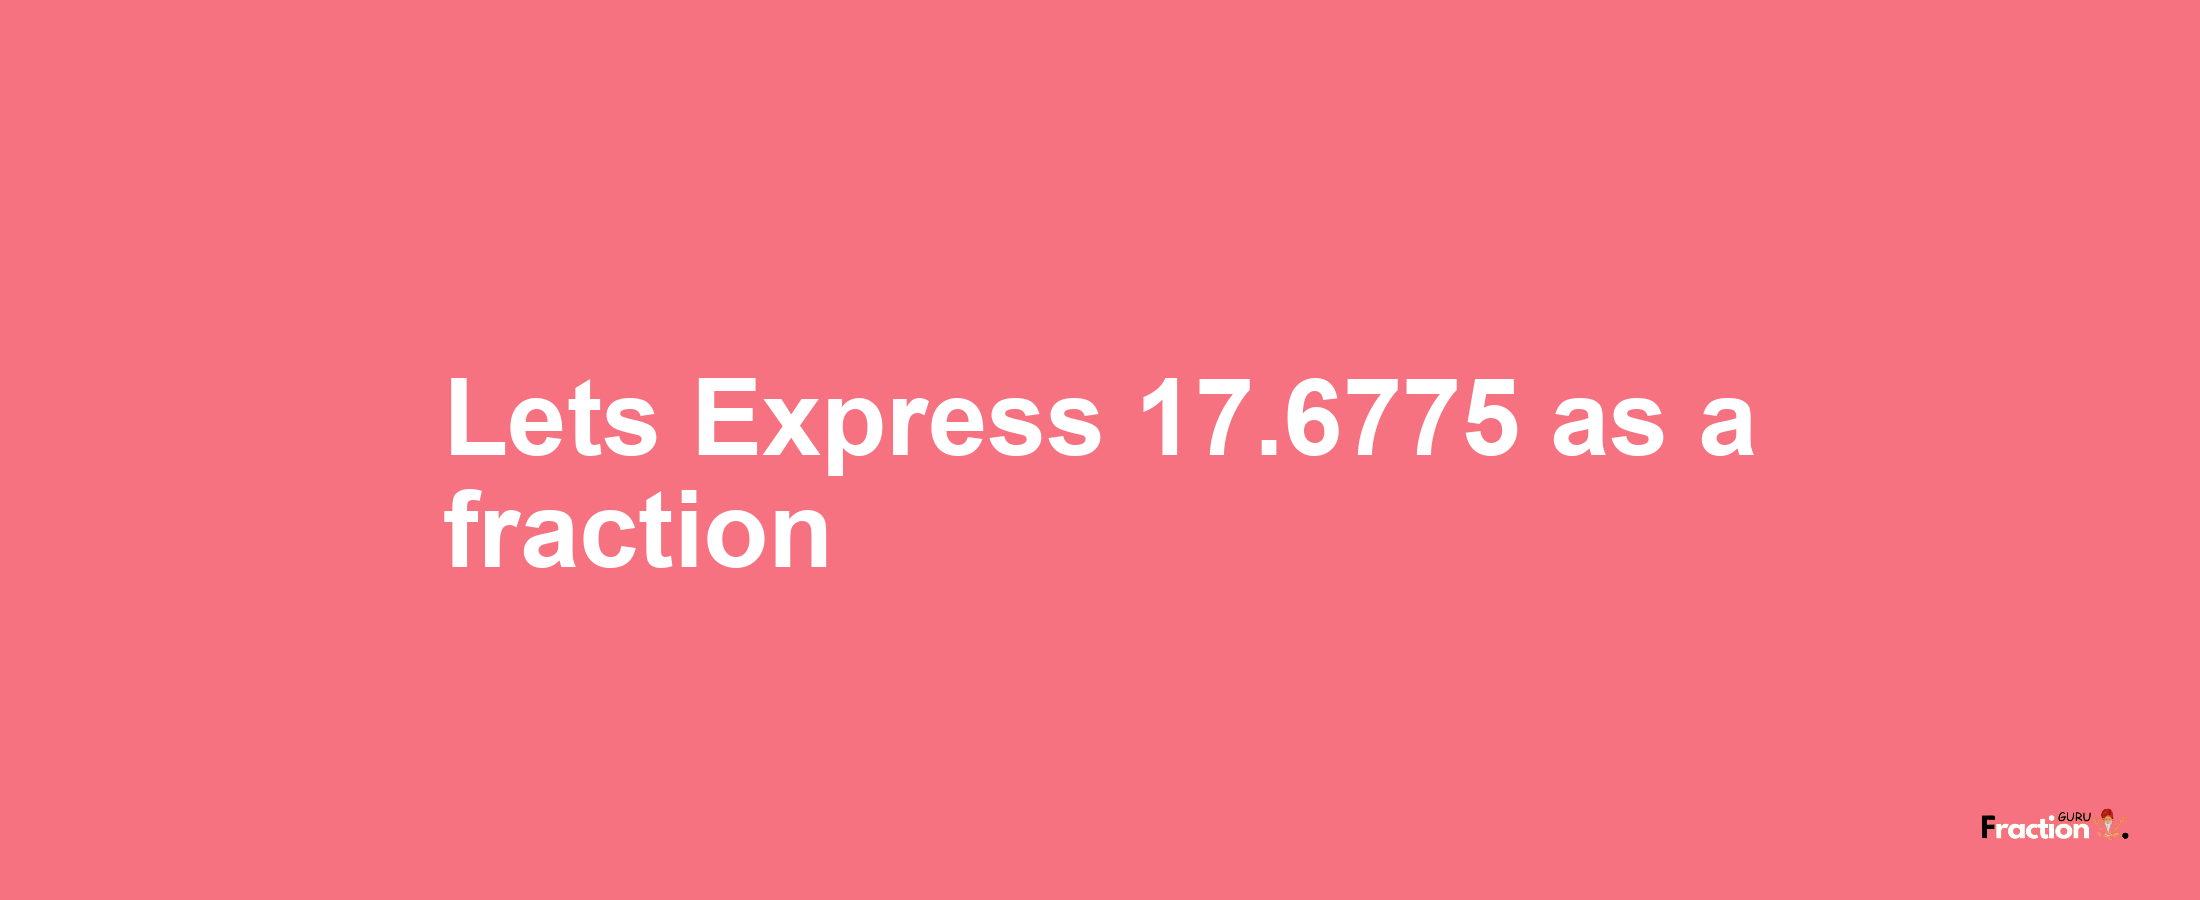 Lets Express 17.6775 as afraction